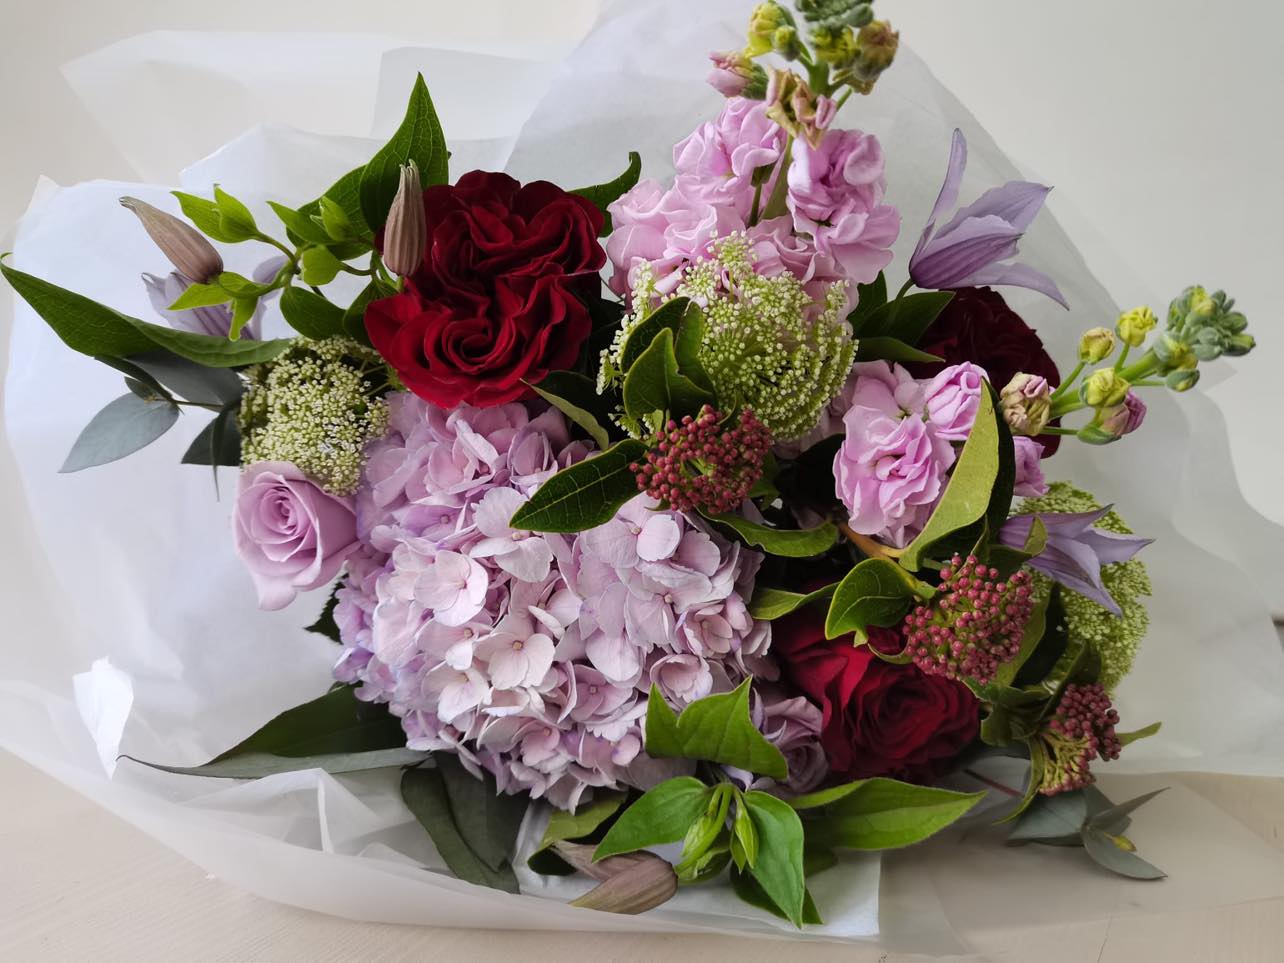 Cherished Moments Bouquet - Deep Red Roses & Lavender Hydrangeas for Mother's Day